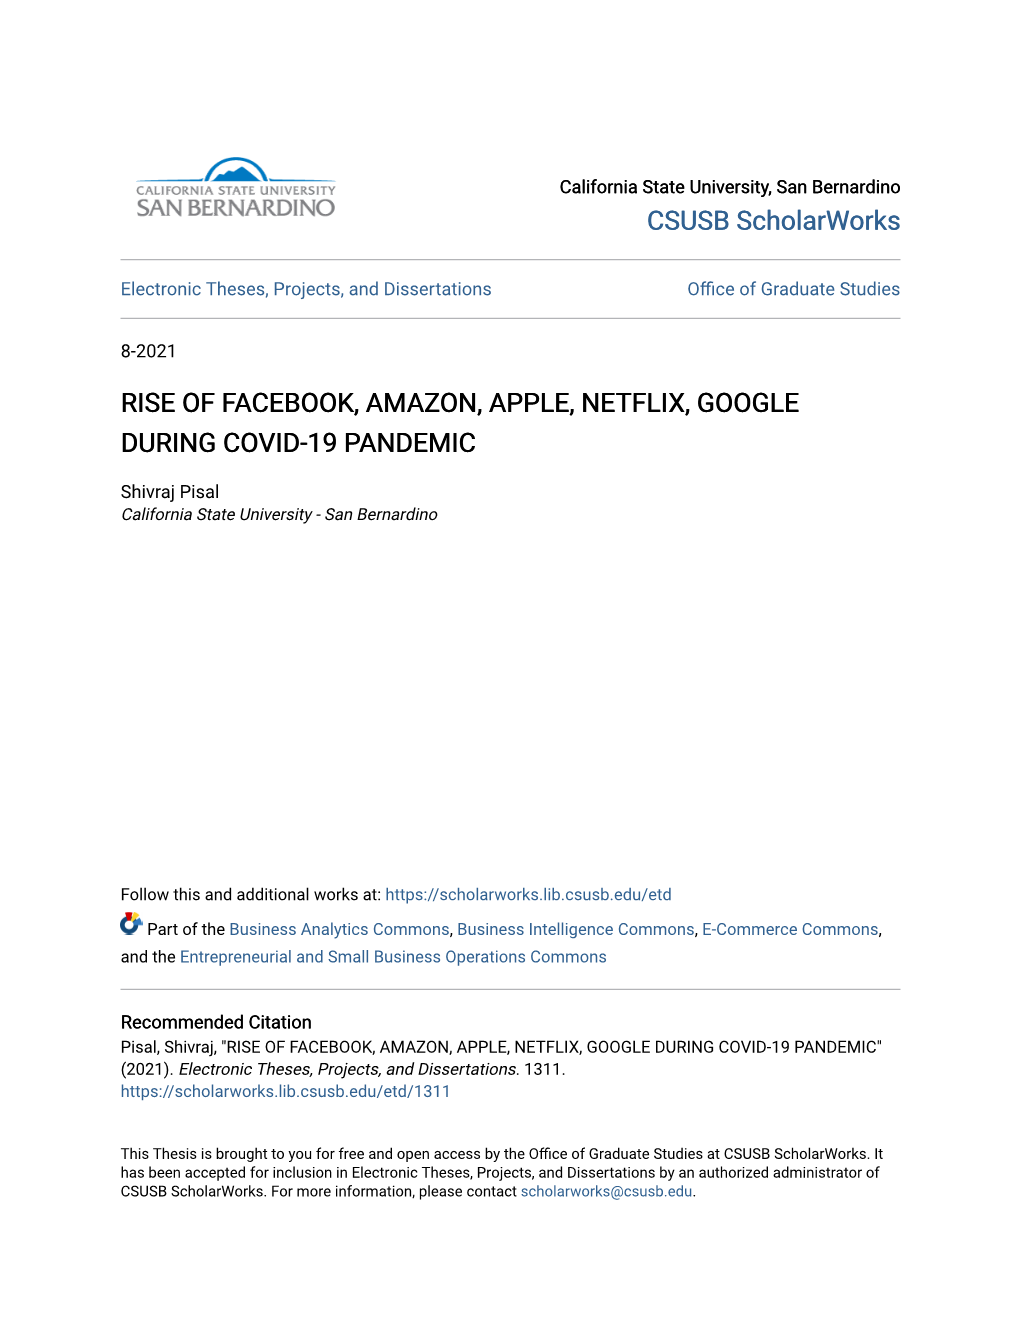 Rise of Facebook, Amazon, Apple, Netflix, Google During Covid-19 Pandemic